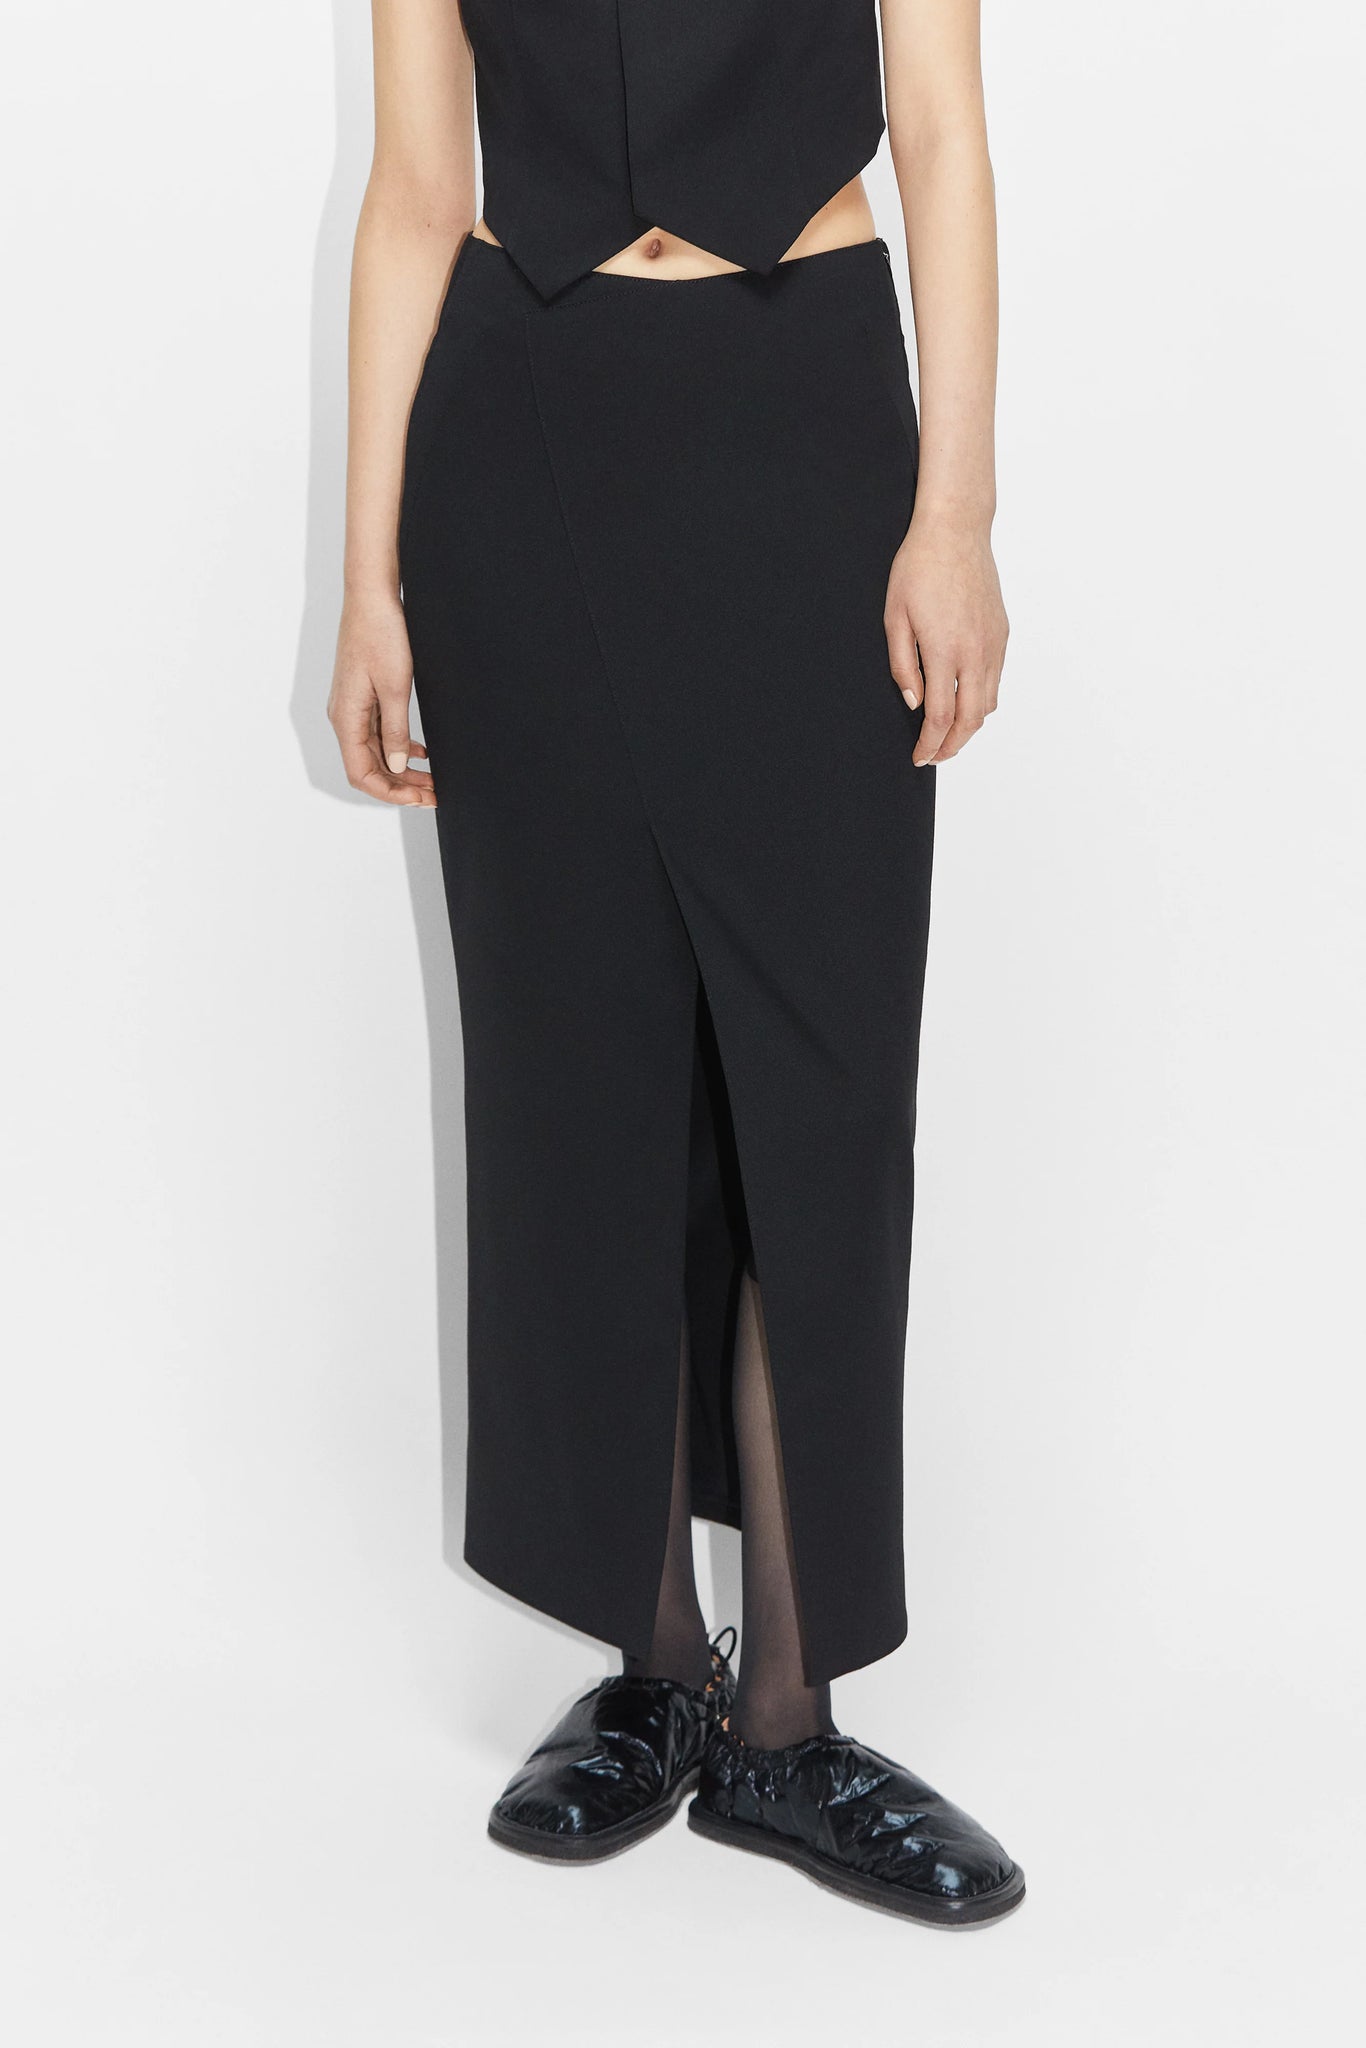 Tail overlapping pencil skirt in black